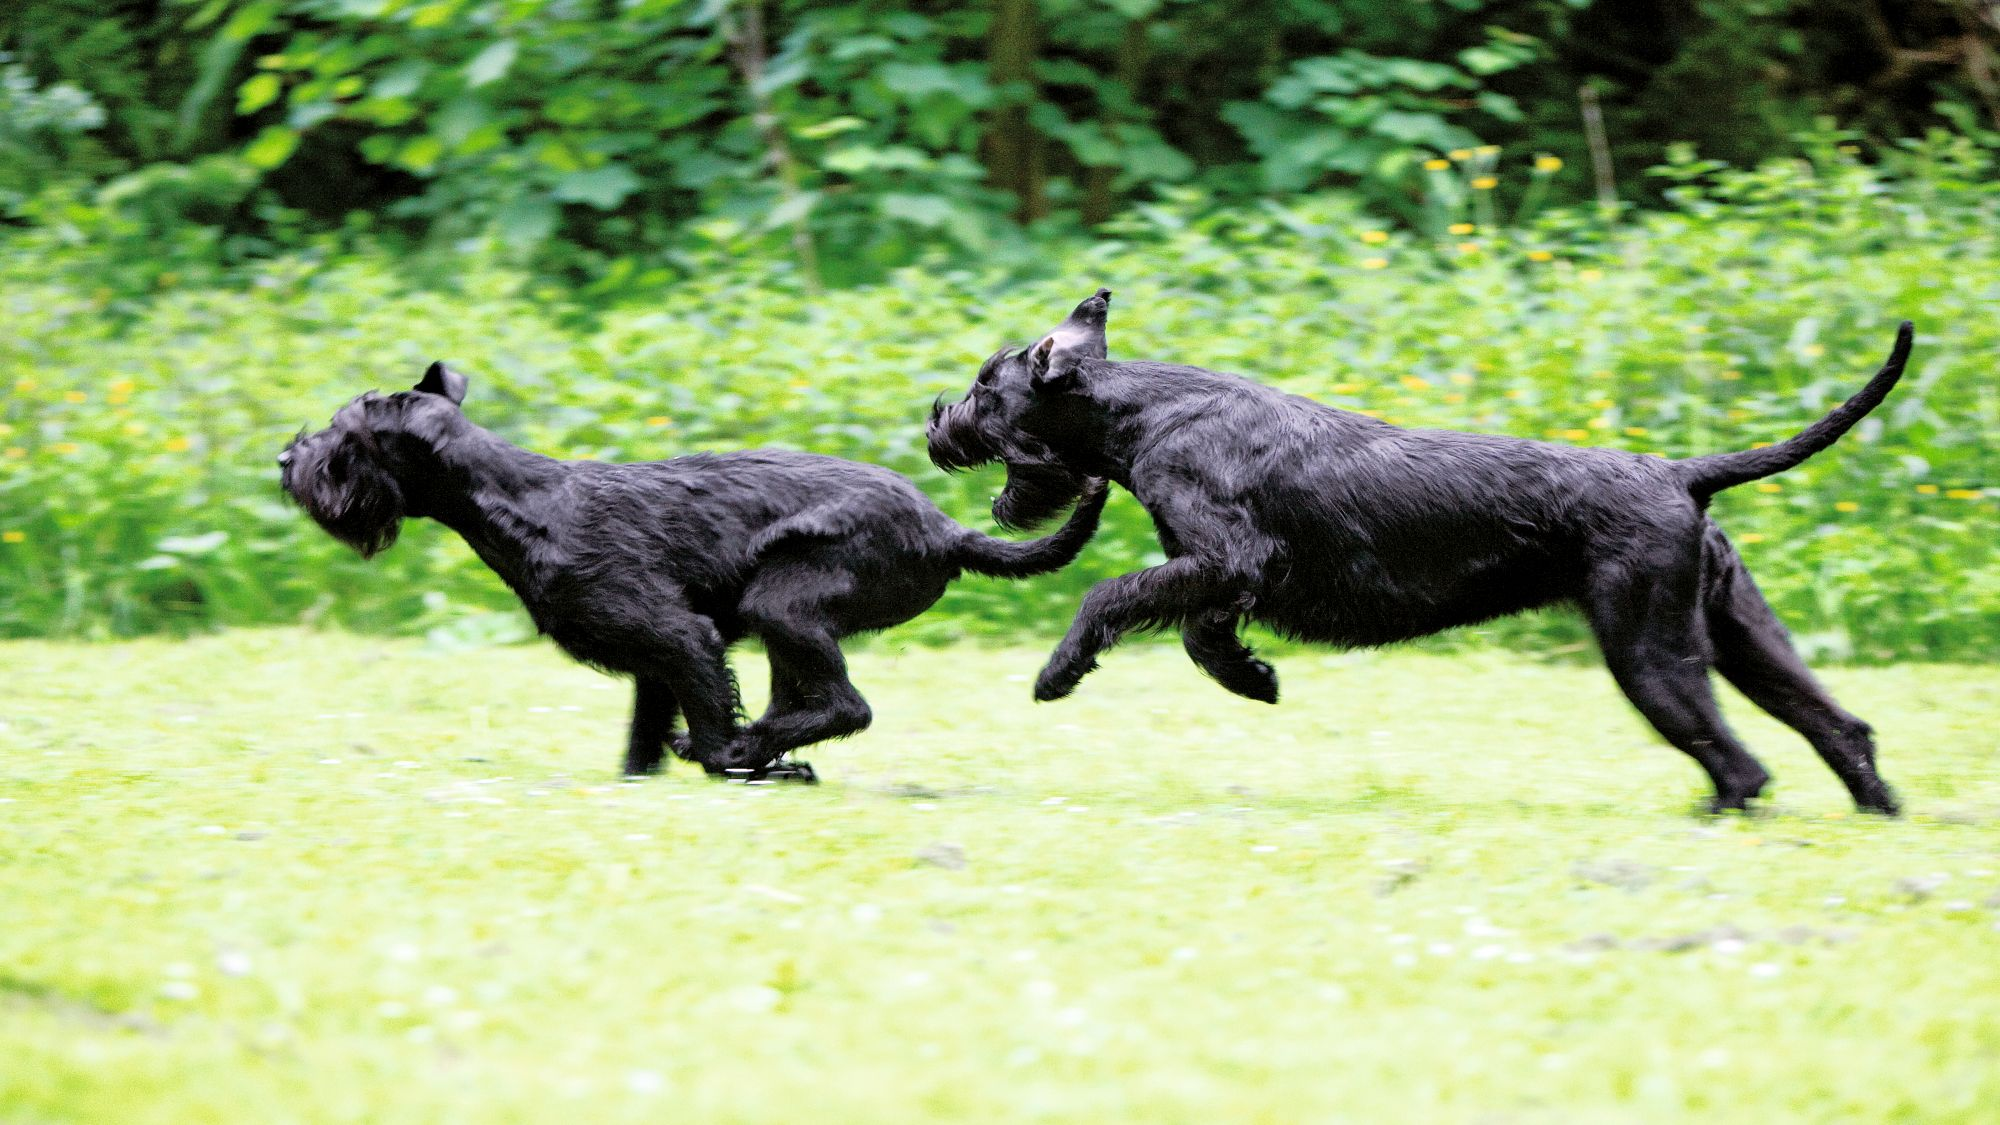 Two Giant Schnauzers running across a lawn